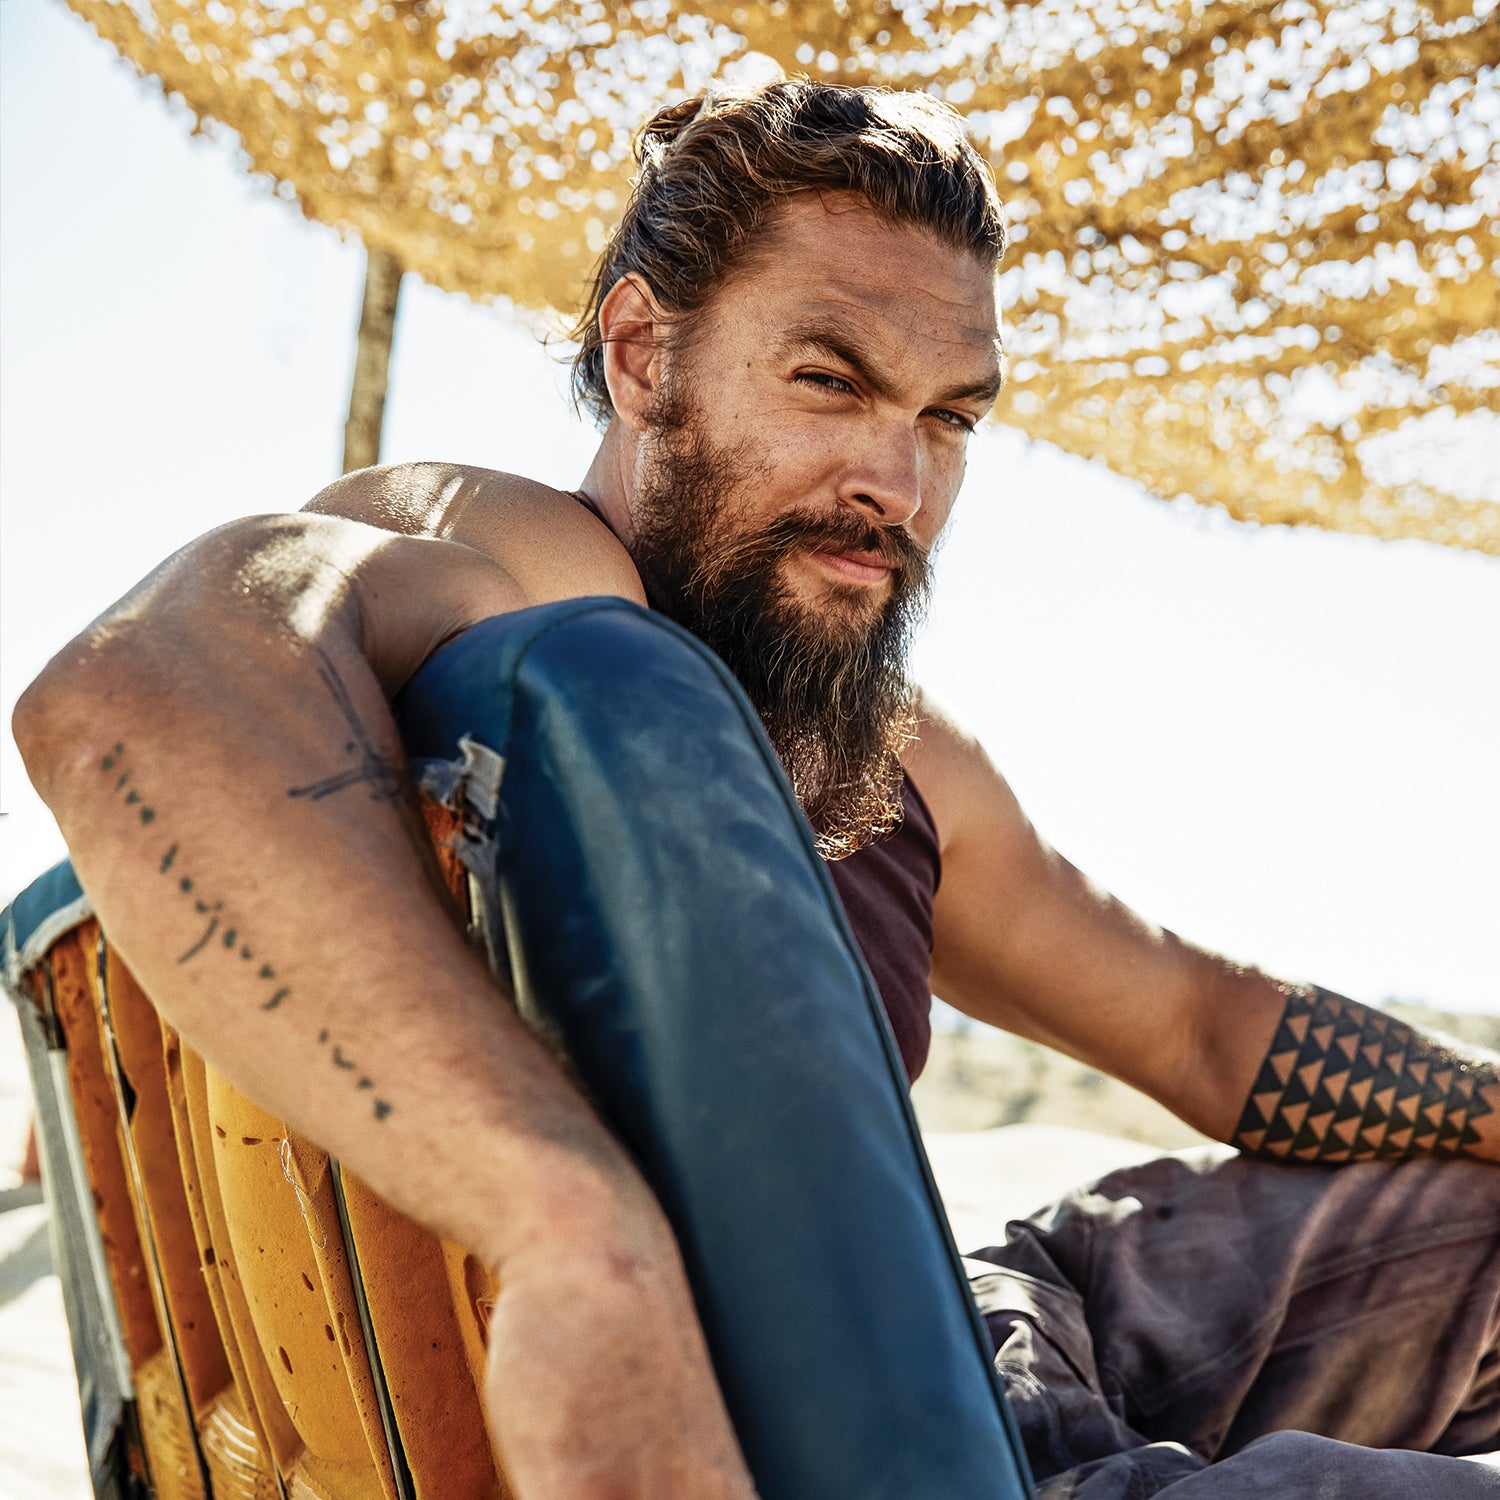 He Ain't Really Fat Man”: Jason Momoa Who Refuses to Even “Touch Weights”  Unless He Is Paid for It, Rescued by Fitness Community for His  Not-So-Muscular Fast X Look - EssentiallySports